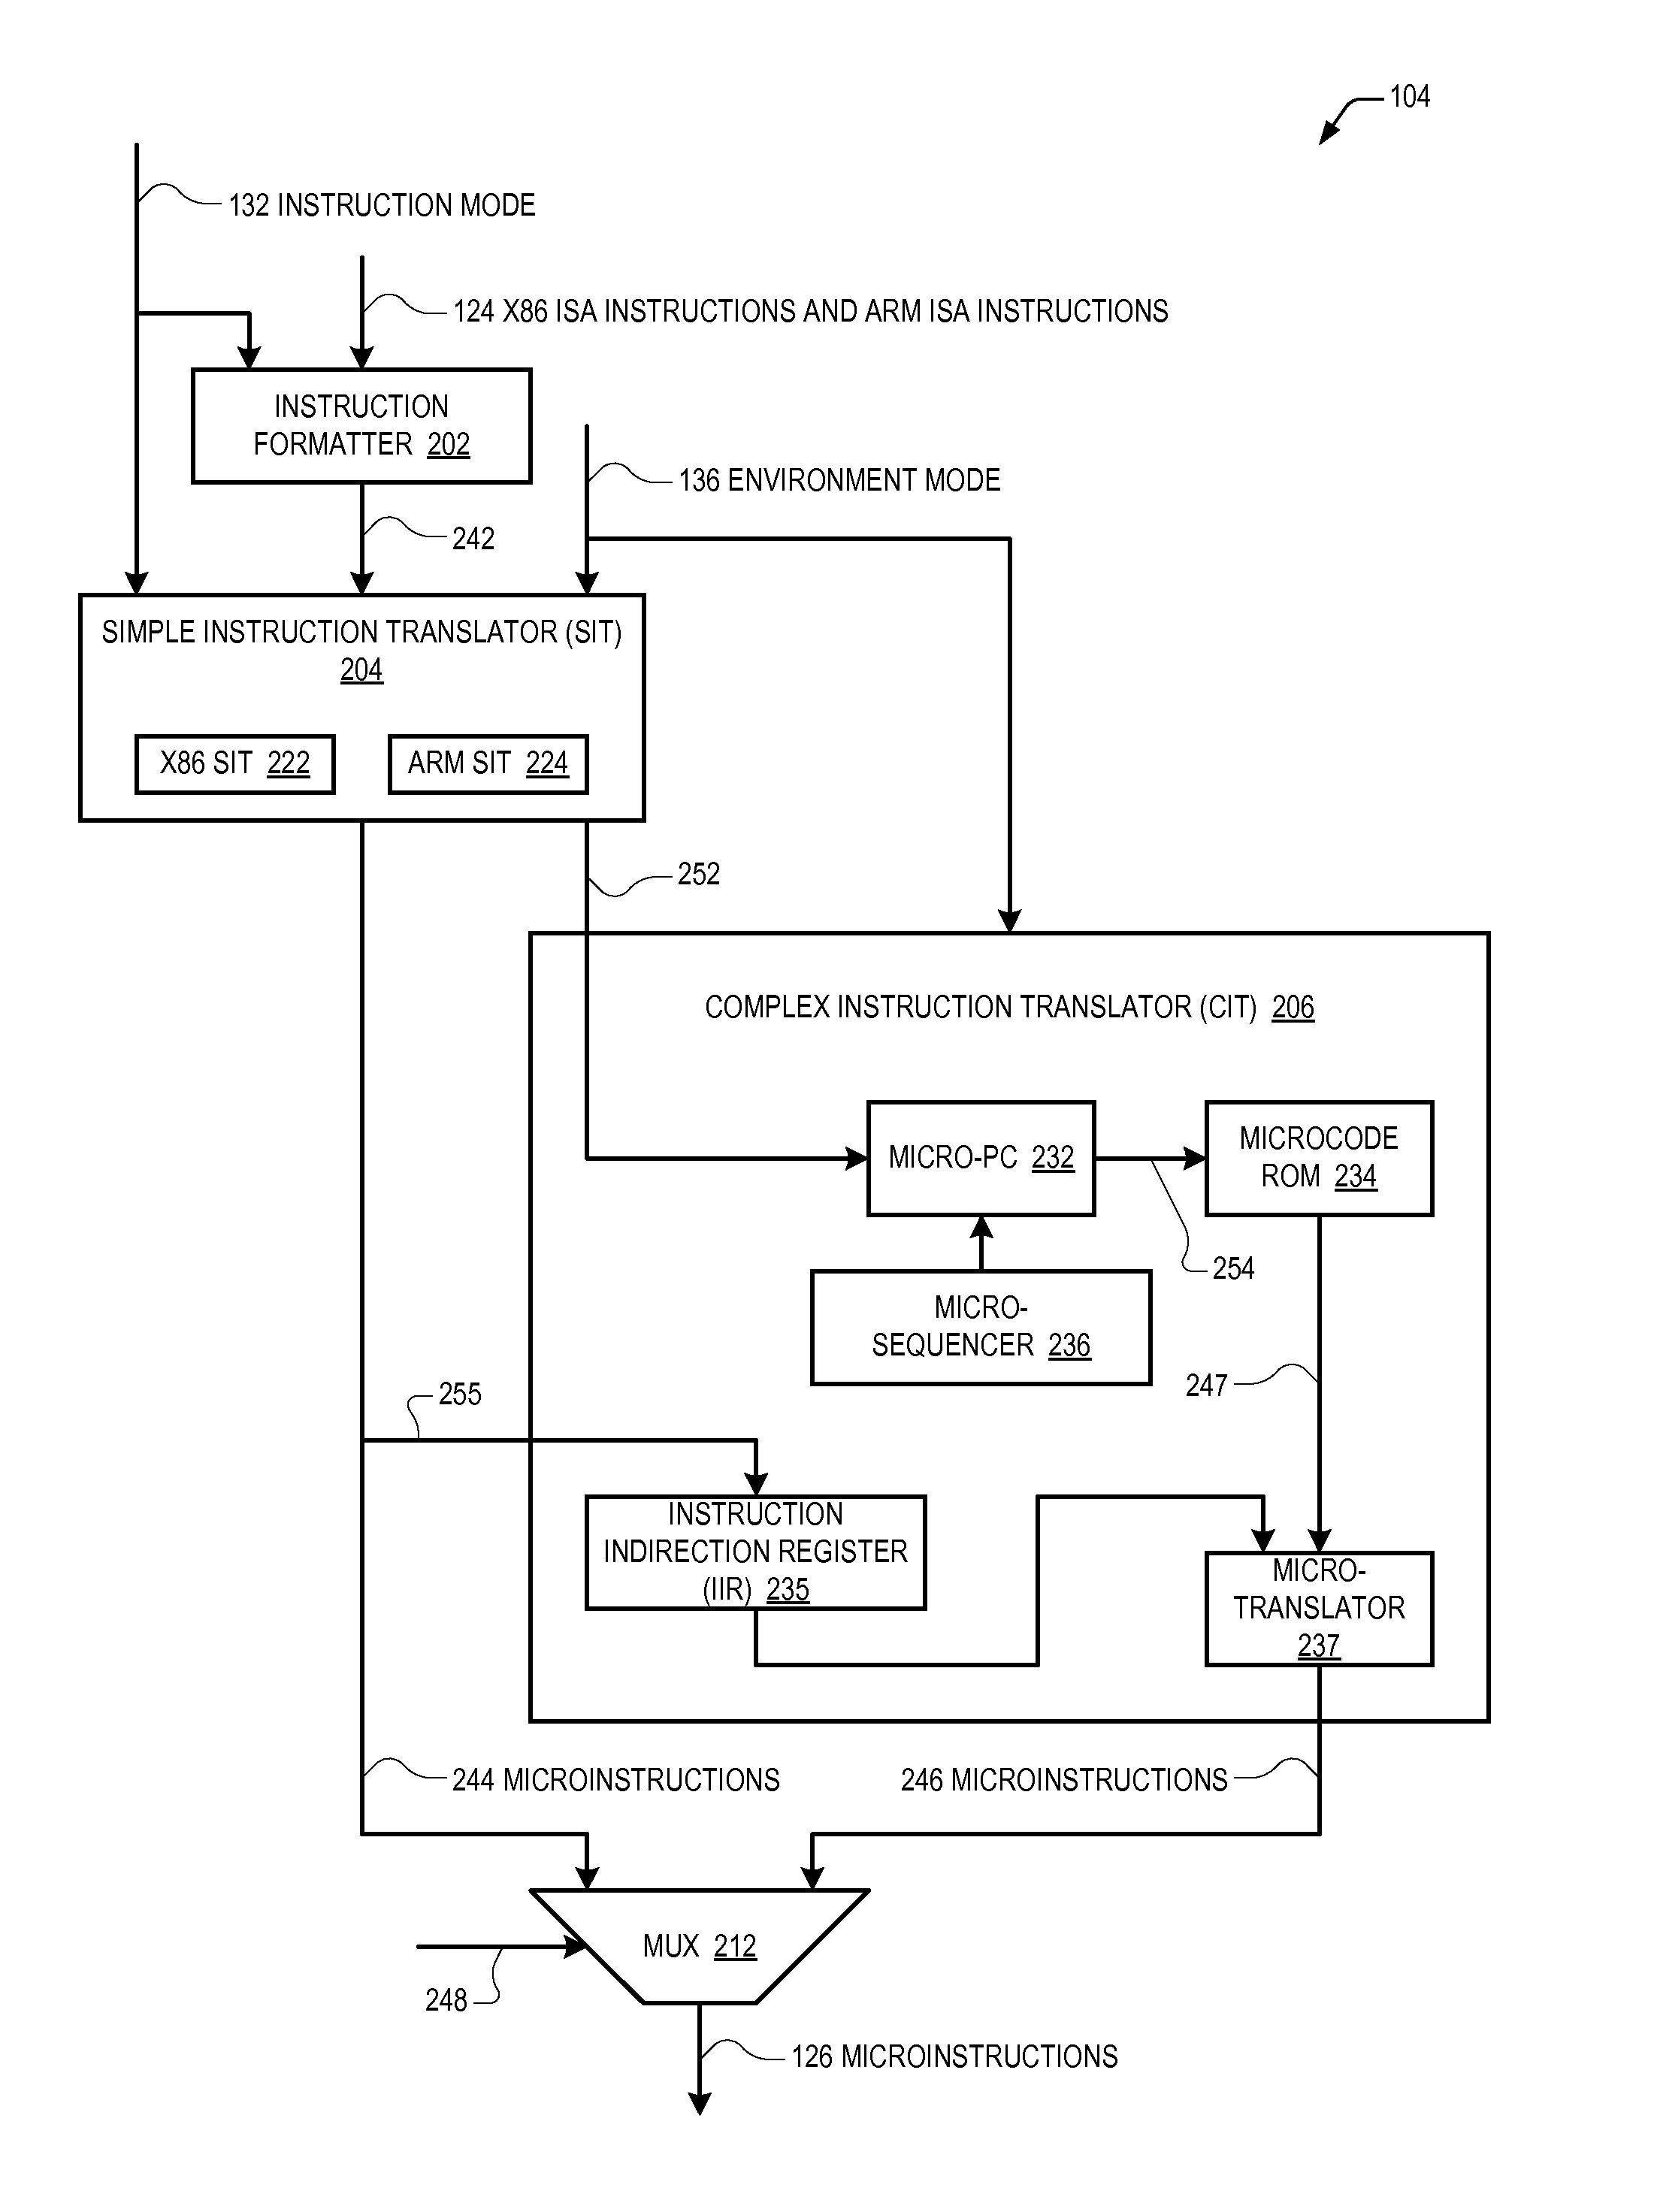 Heterogeneous isa microprocessor with shared hardware isa registers